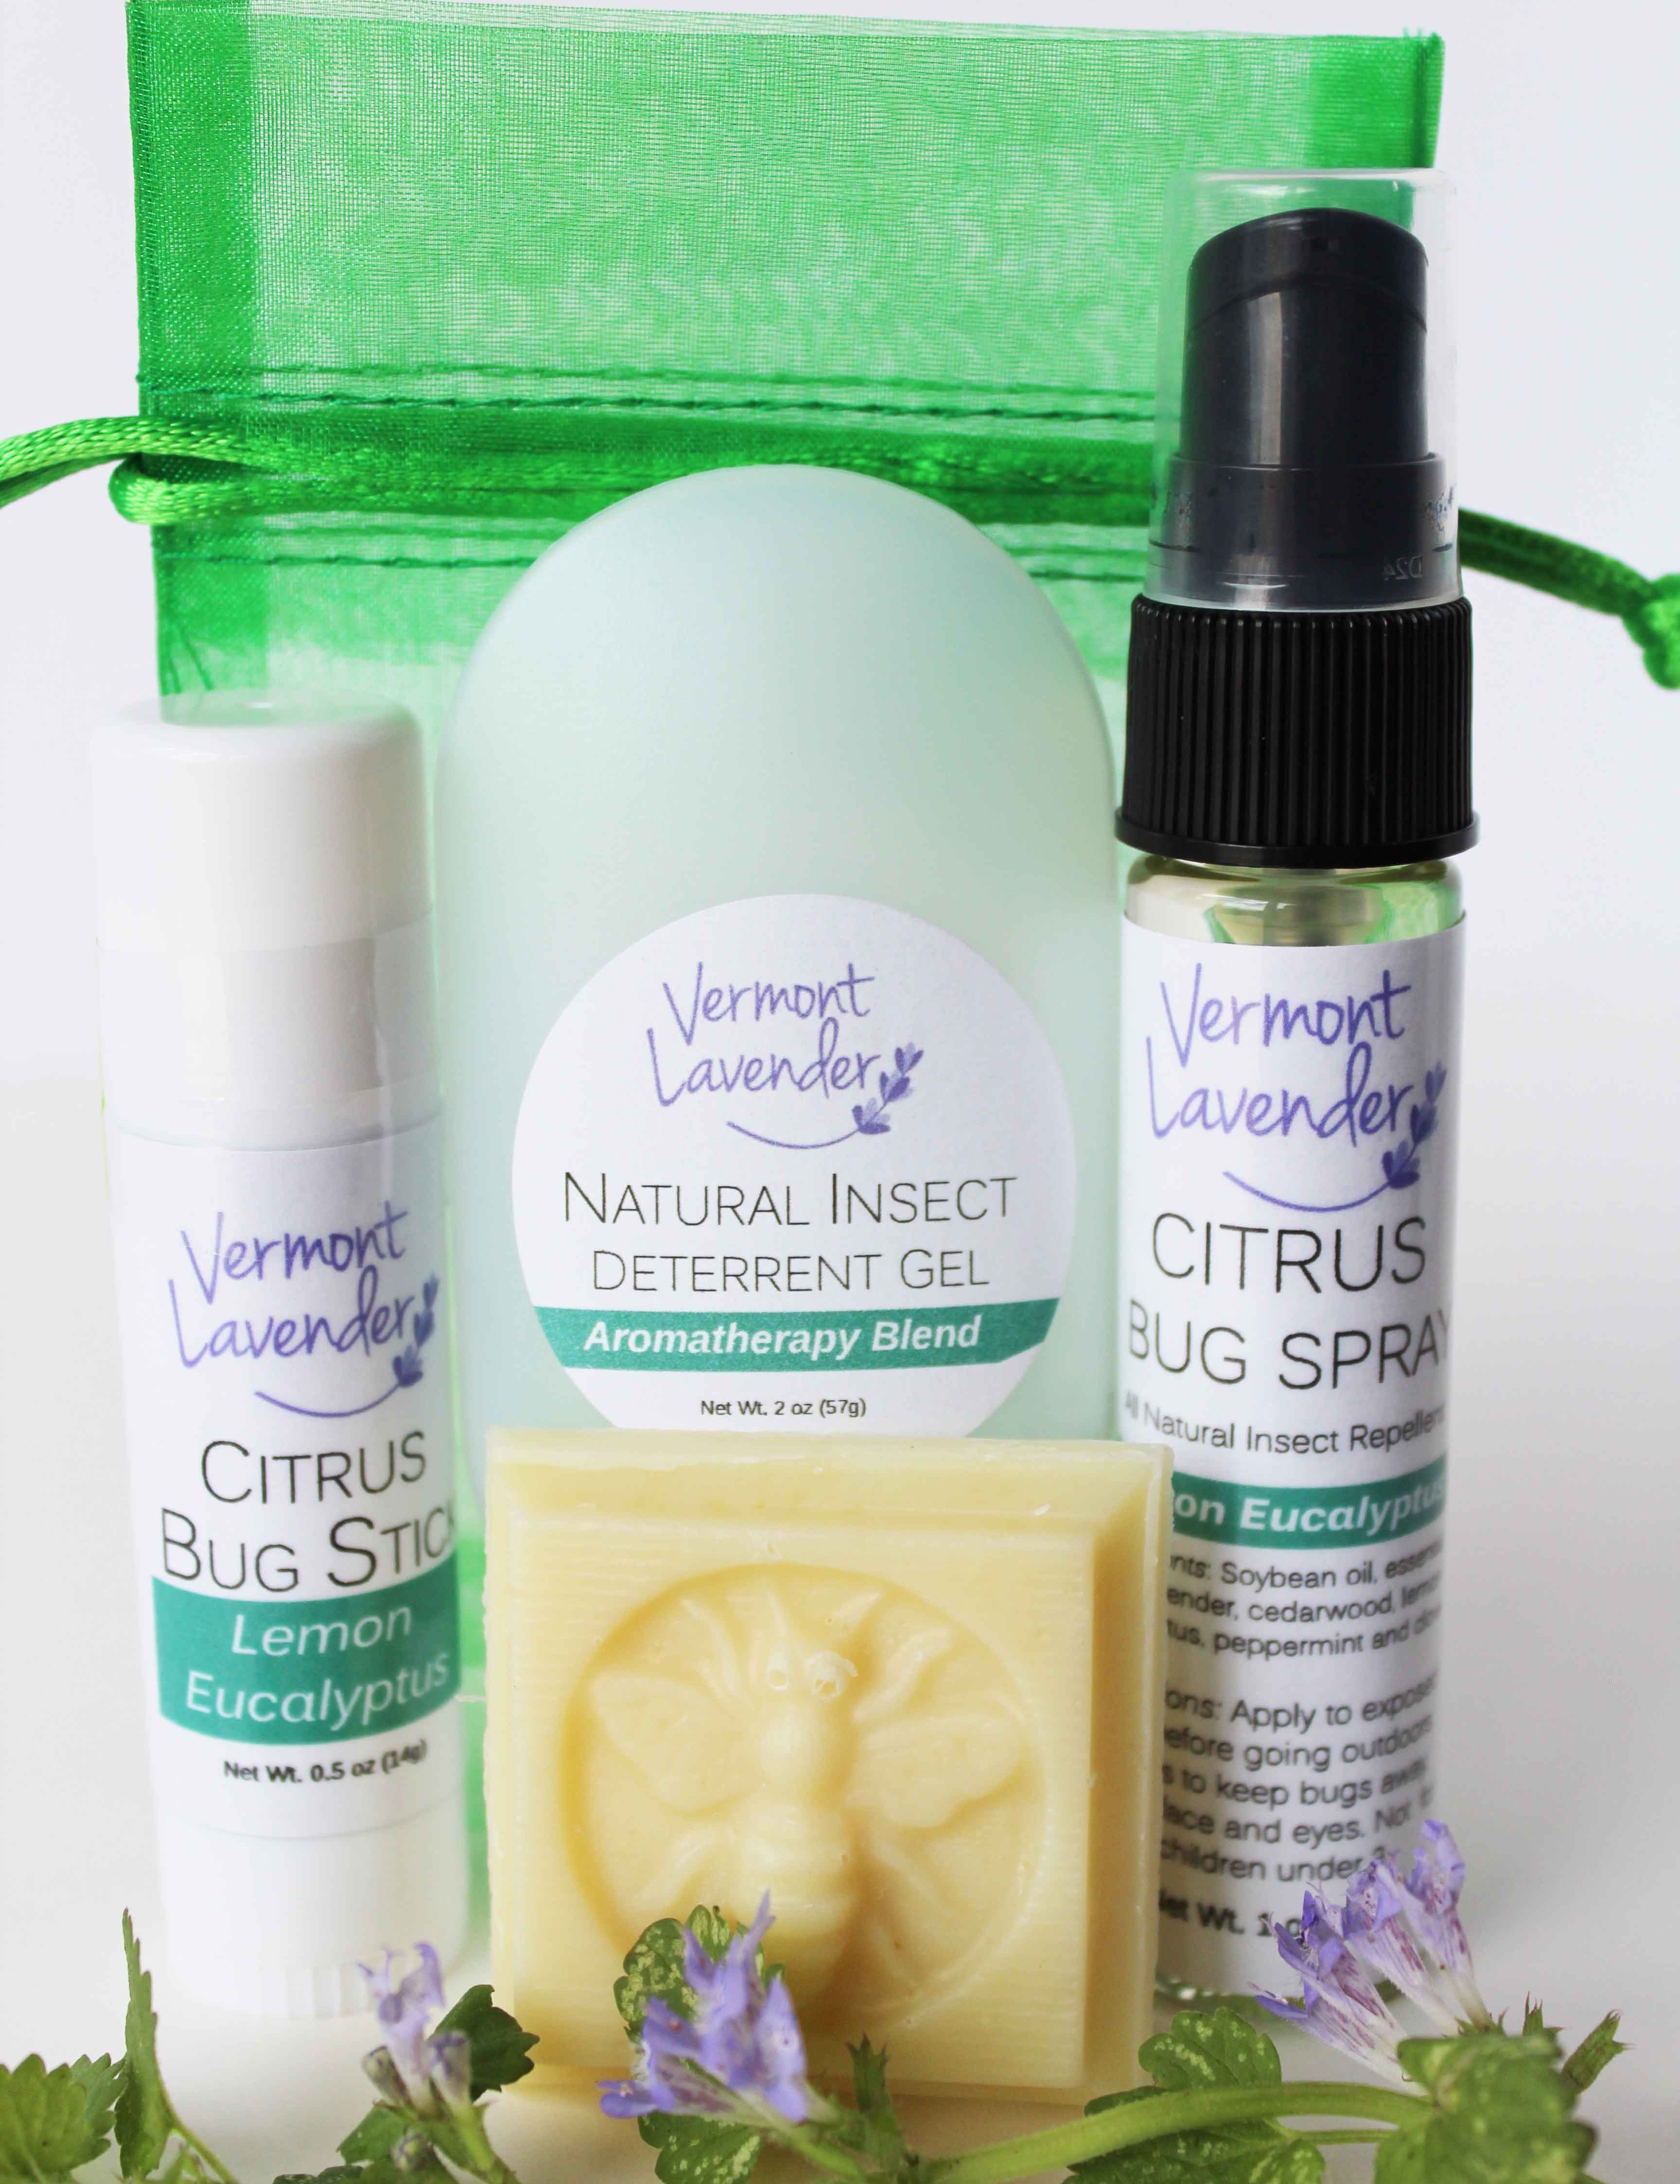 Citrus bug kit spray lotion stick natural insect deterrent gel aromatherapy hand soap and organza bag